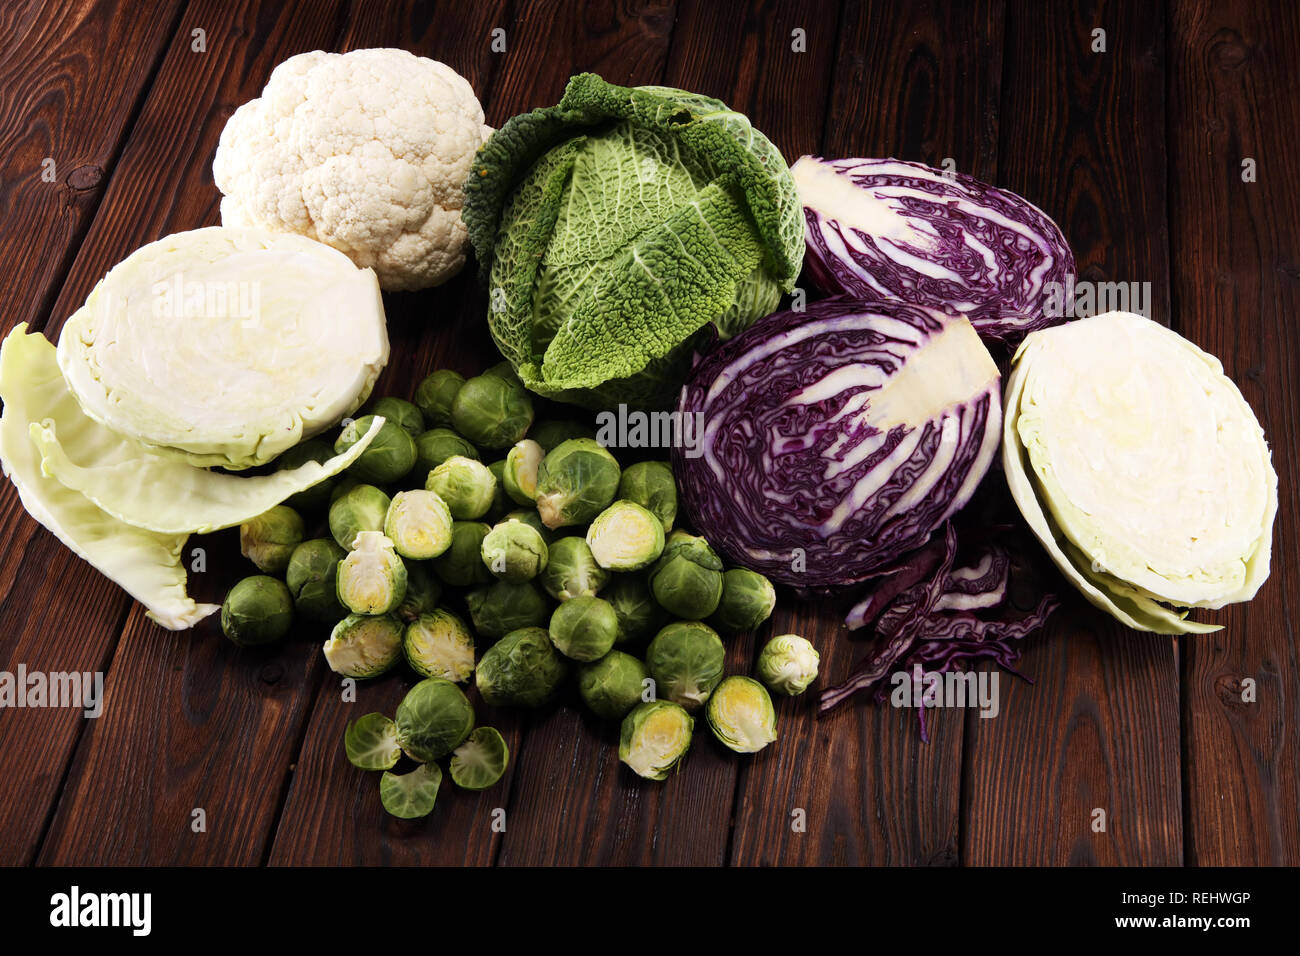 organic cabbage heads. Antioxidant balanced diet eating with red cabbage, white cabbage and savoy. cauliflower and Brussels sprouts Stock Photo